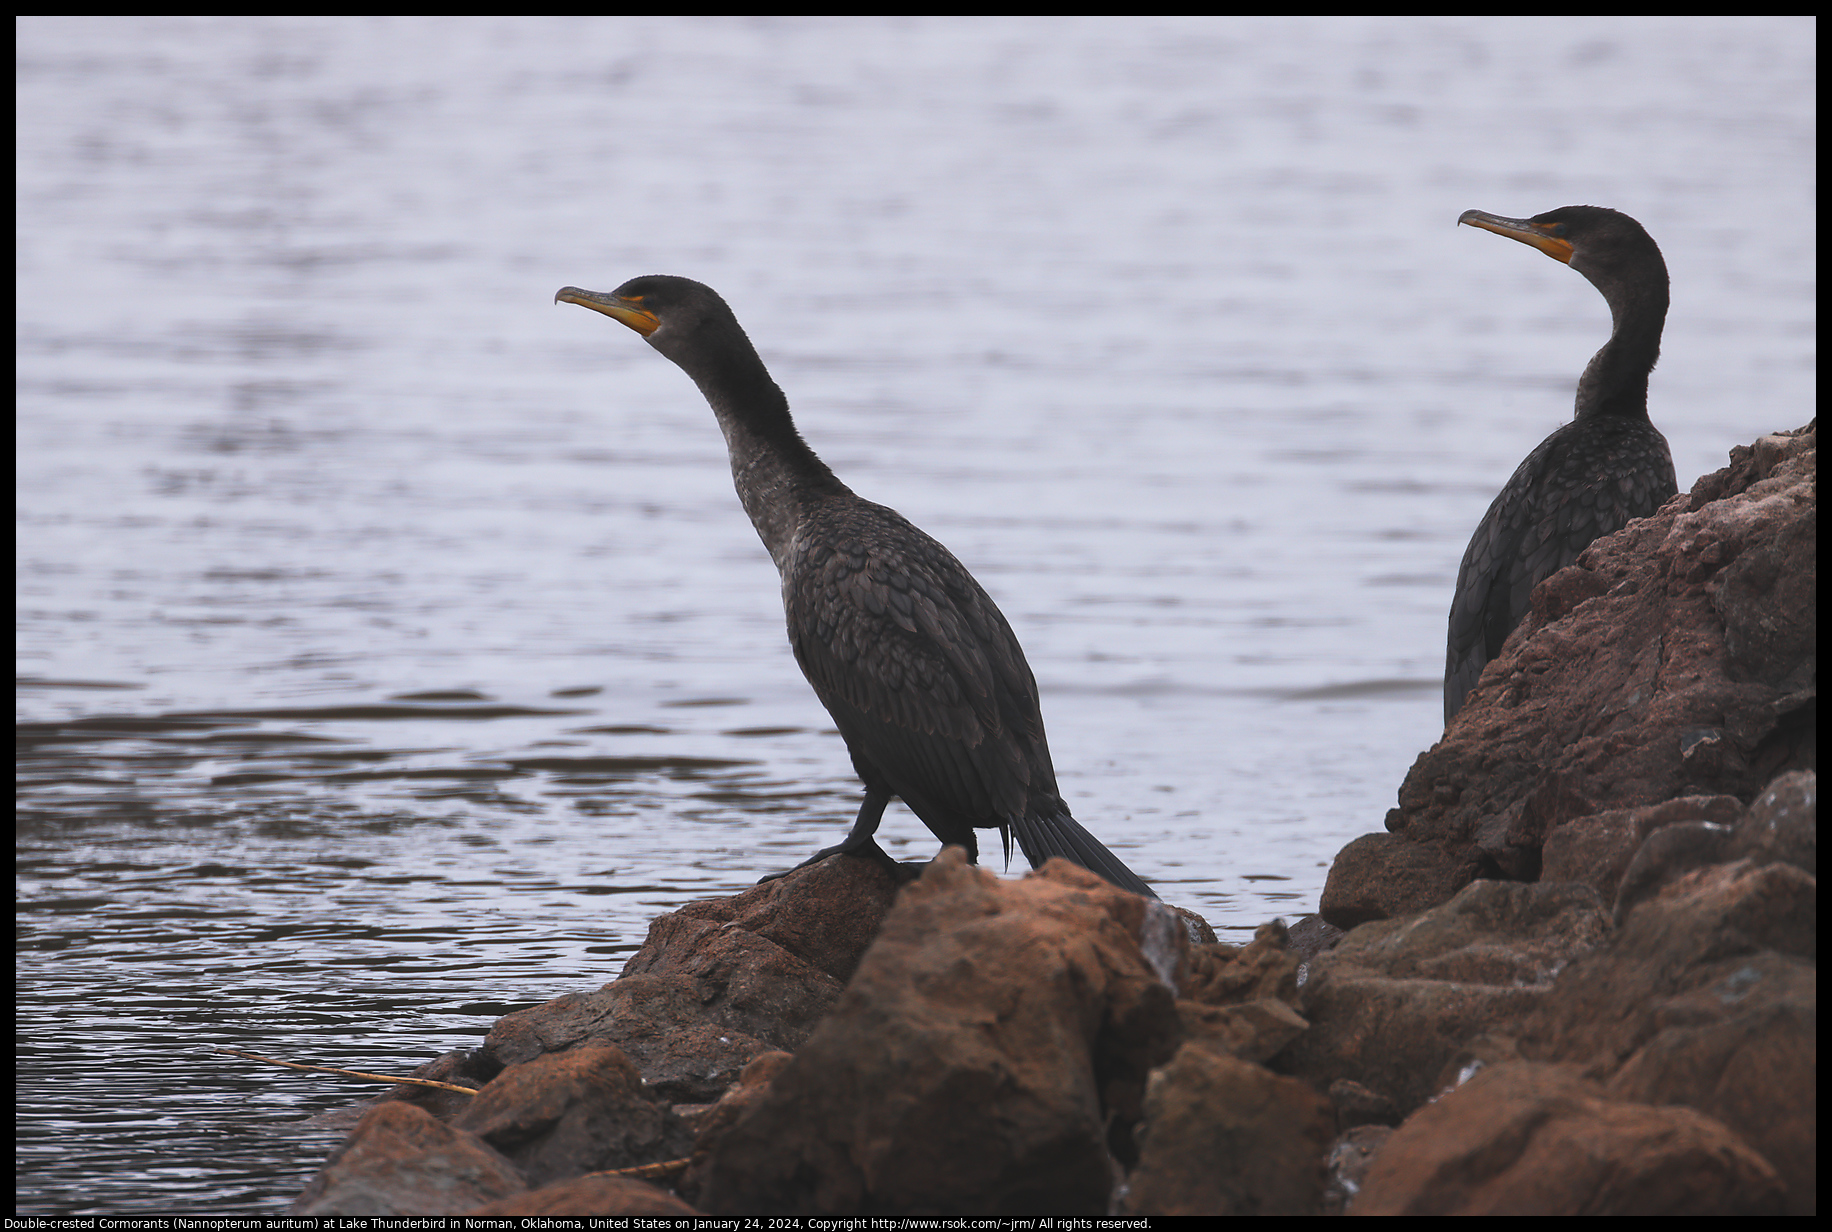 Double-crested Cormorants (Nannopterum auritum) at Lake Thunderbird in Norman, Oklahoma, United States on January 24, 2024